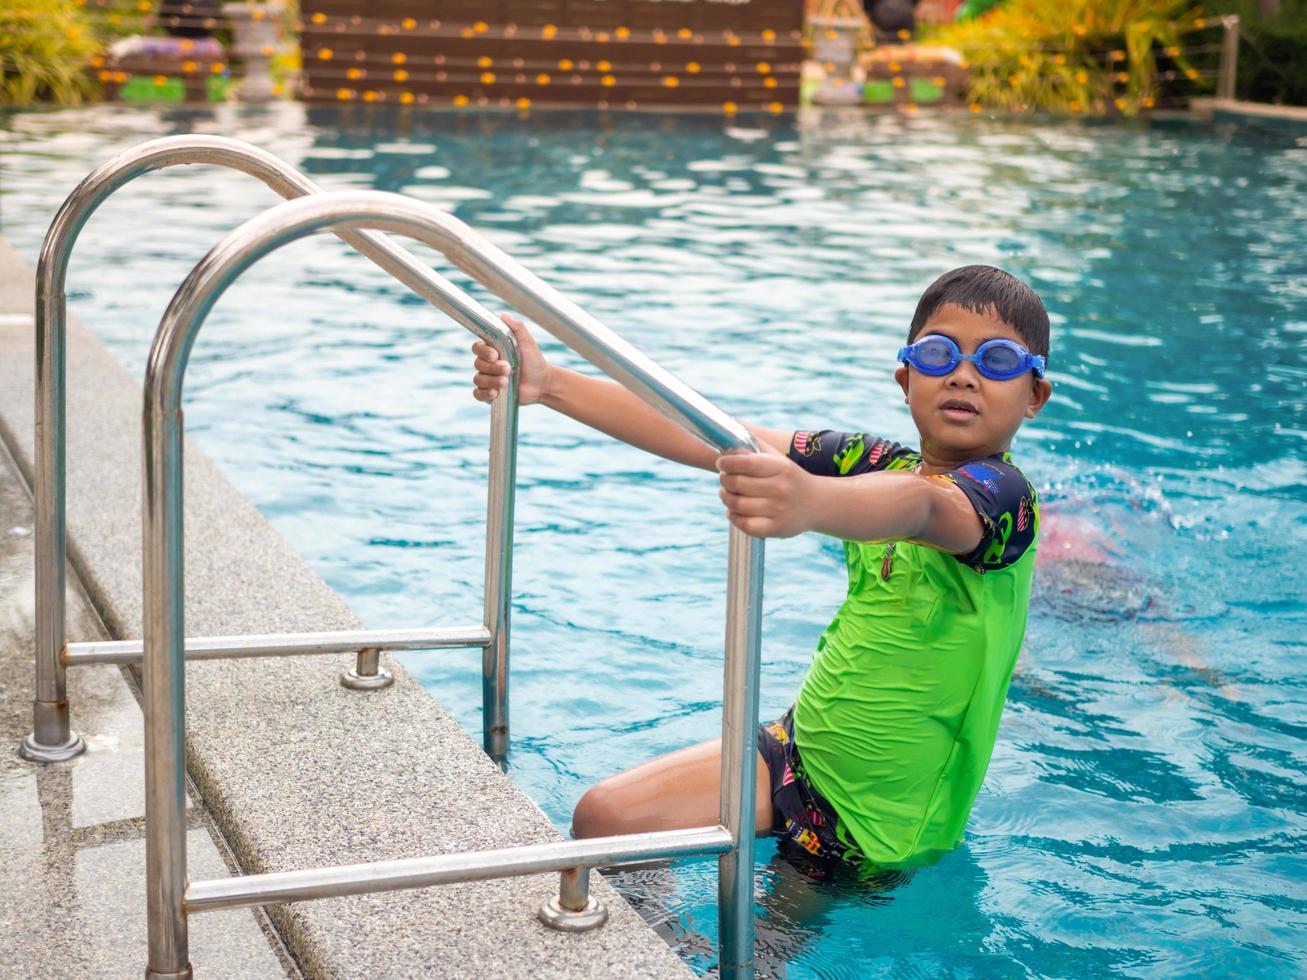 The boy wearing swimming goggles on blue pool ladder green swimsuit photo